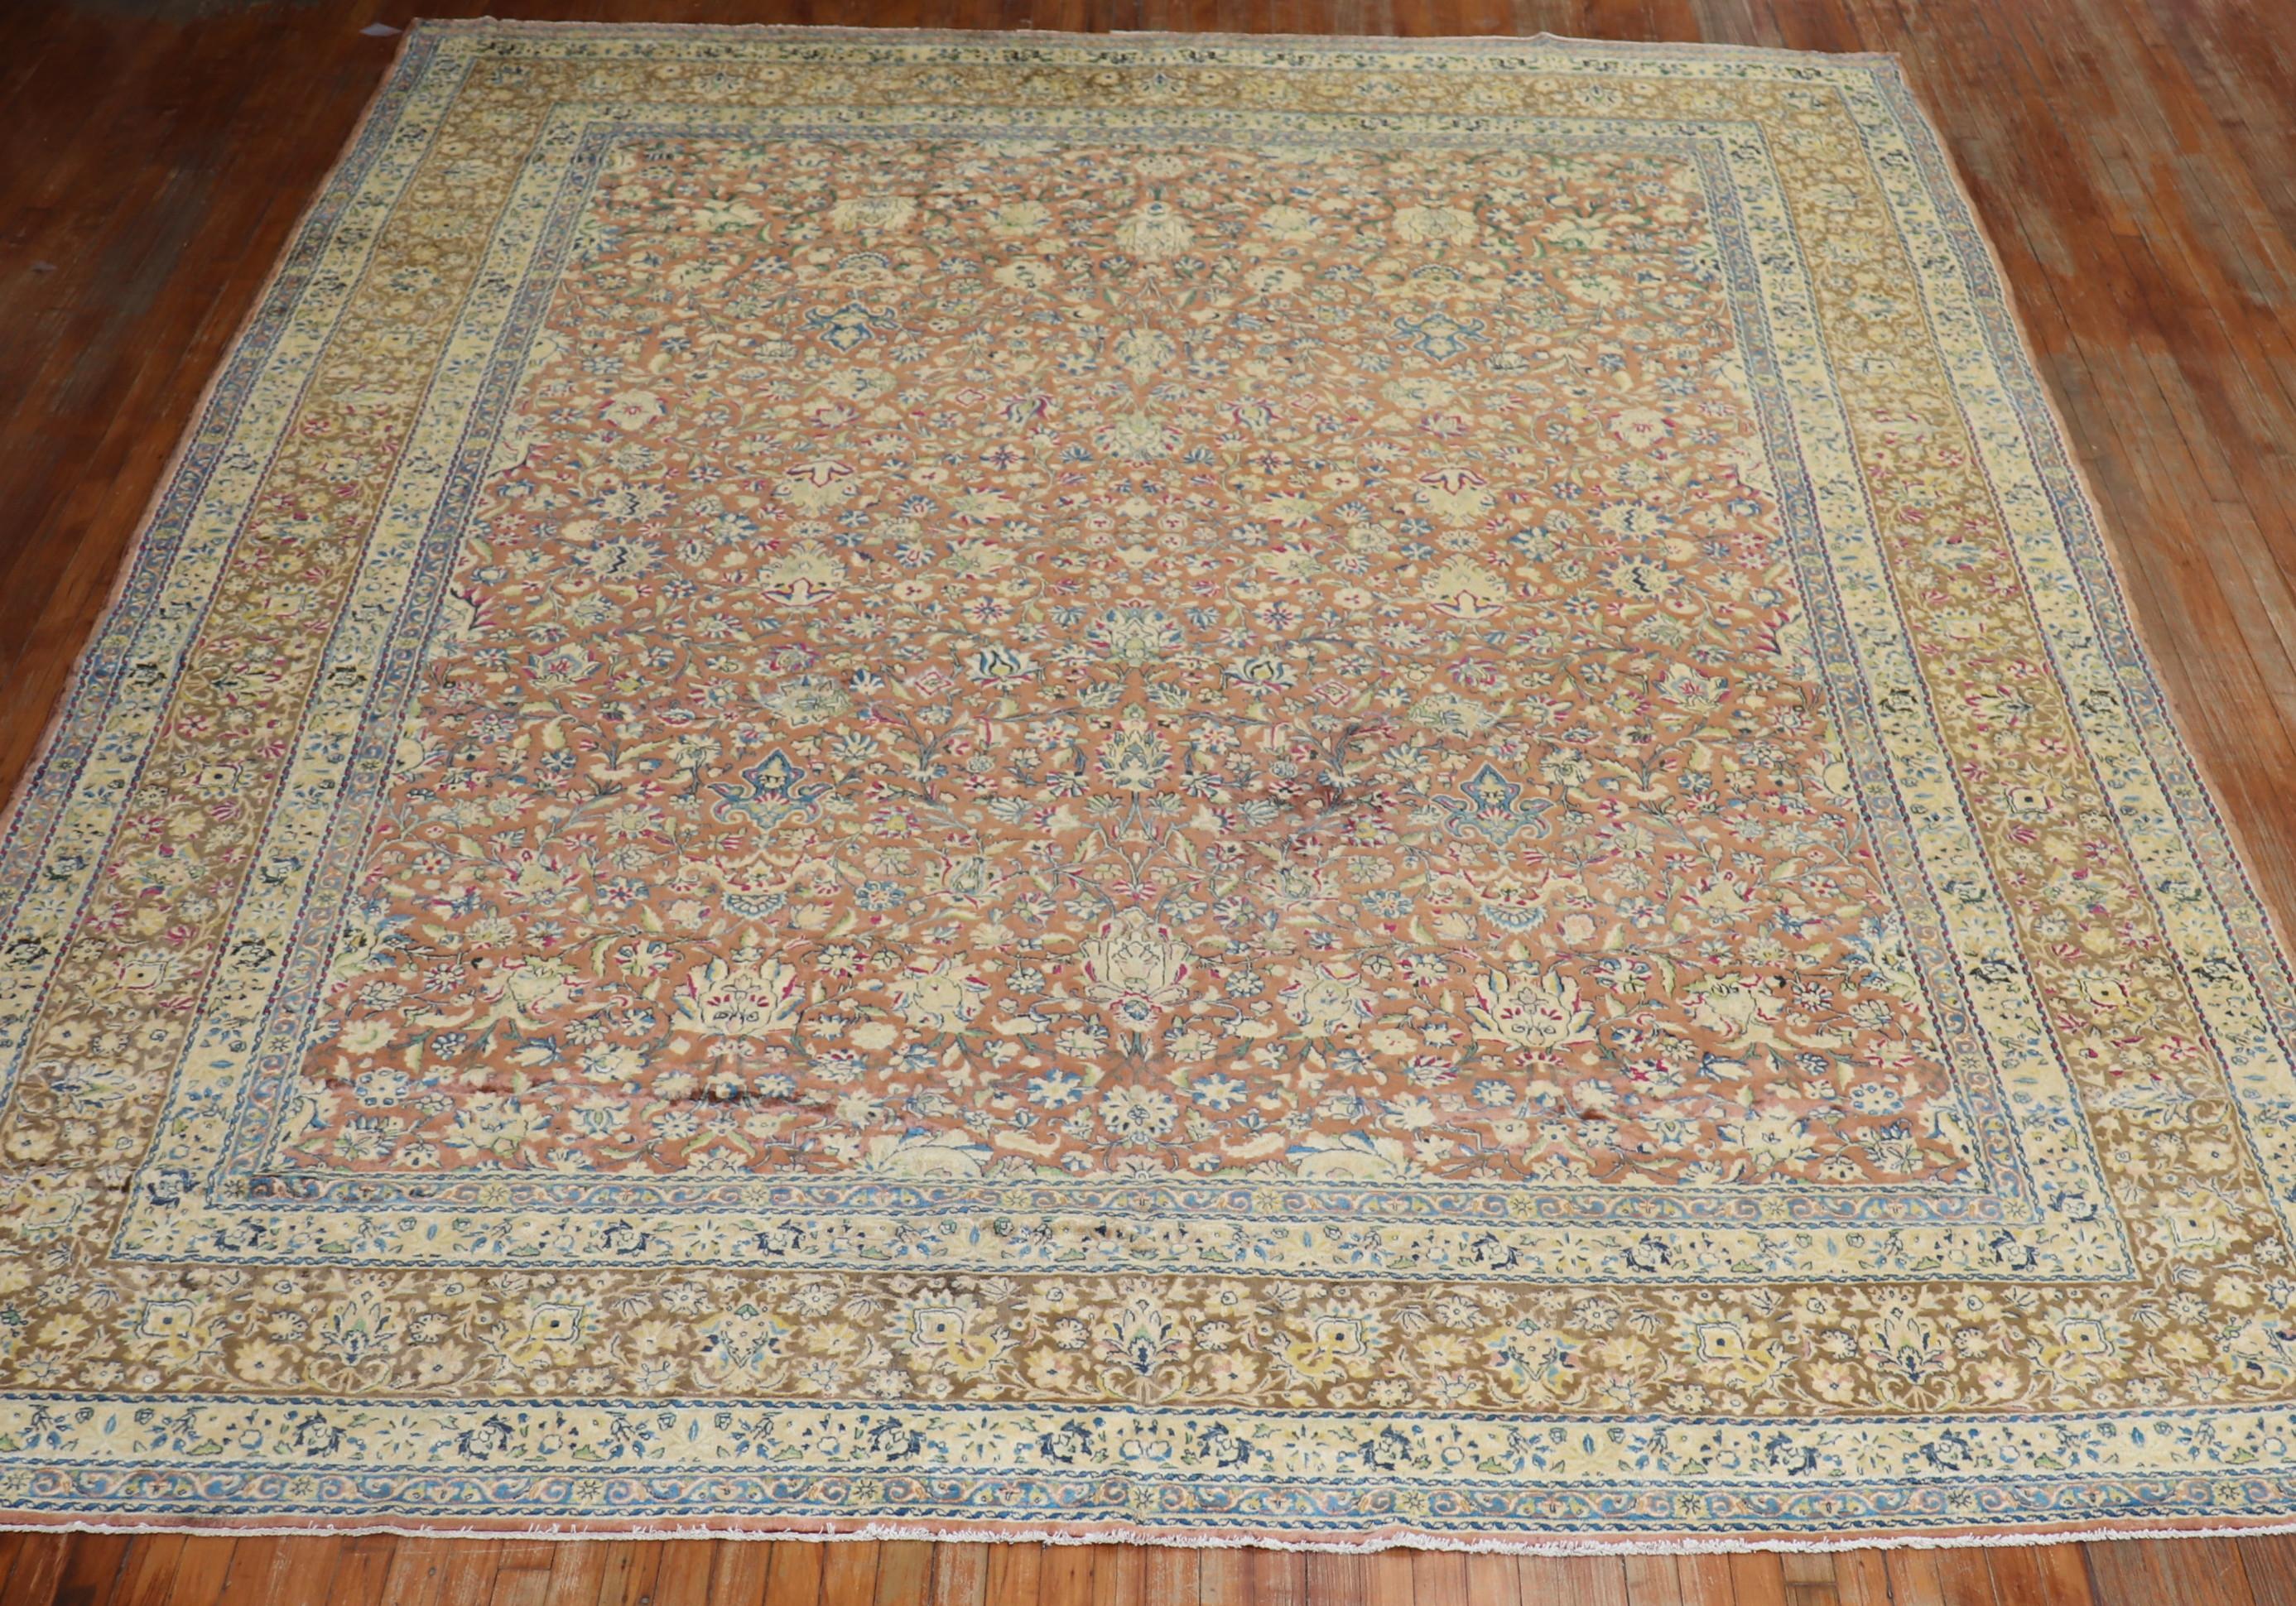 An early 20th century North Indian Kerman rug woven with silk sheen wool. Sparkling accents in pink, blue and raspberry on a brown colored field.

Measures: 10'7'' x 13'6''

Unlike antique Agra carpets manufactured in the prisons of India,